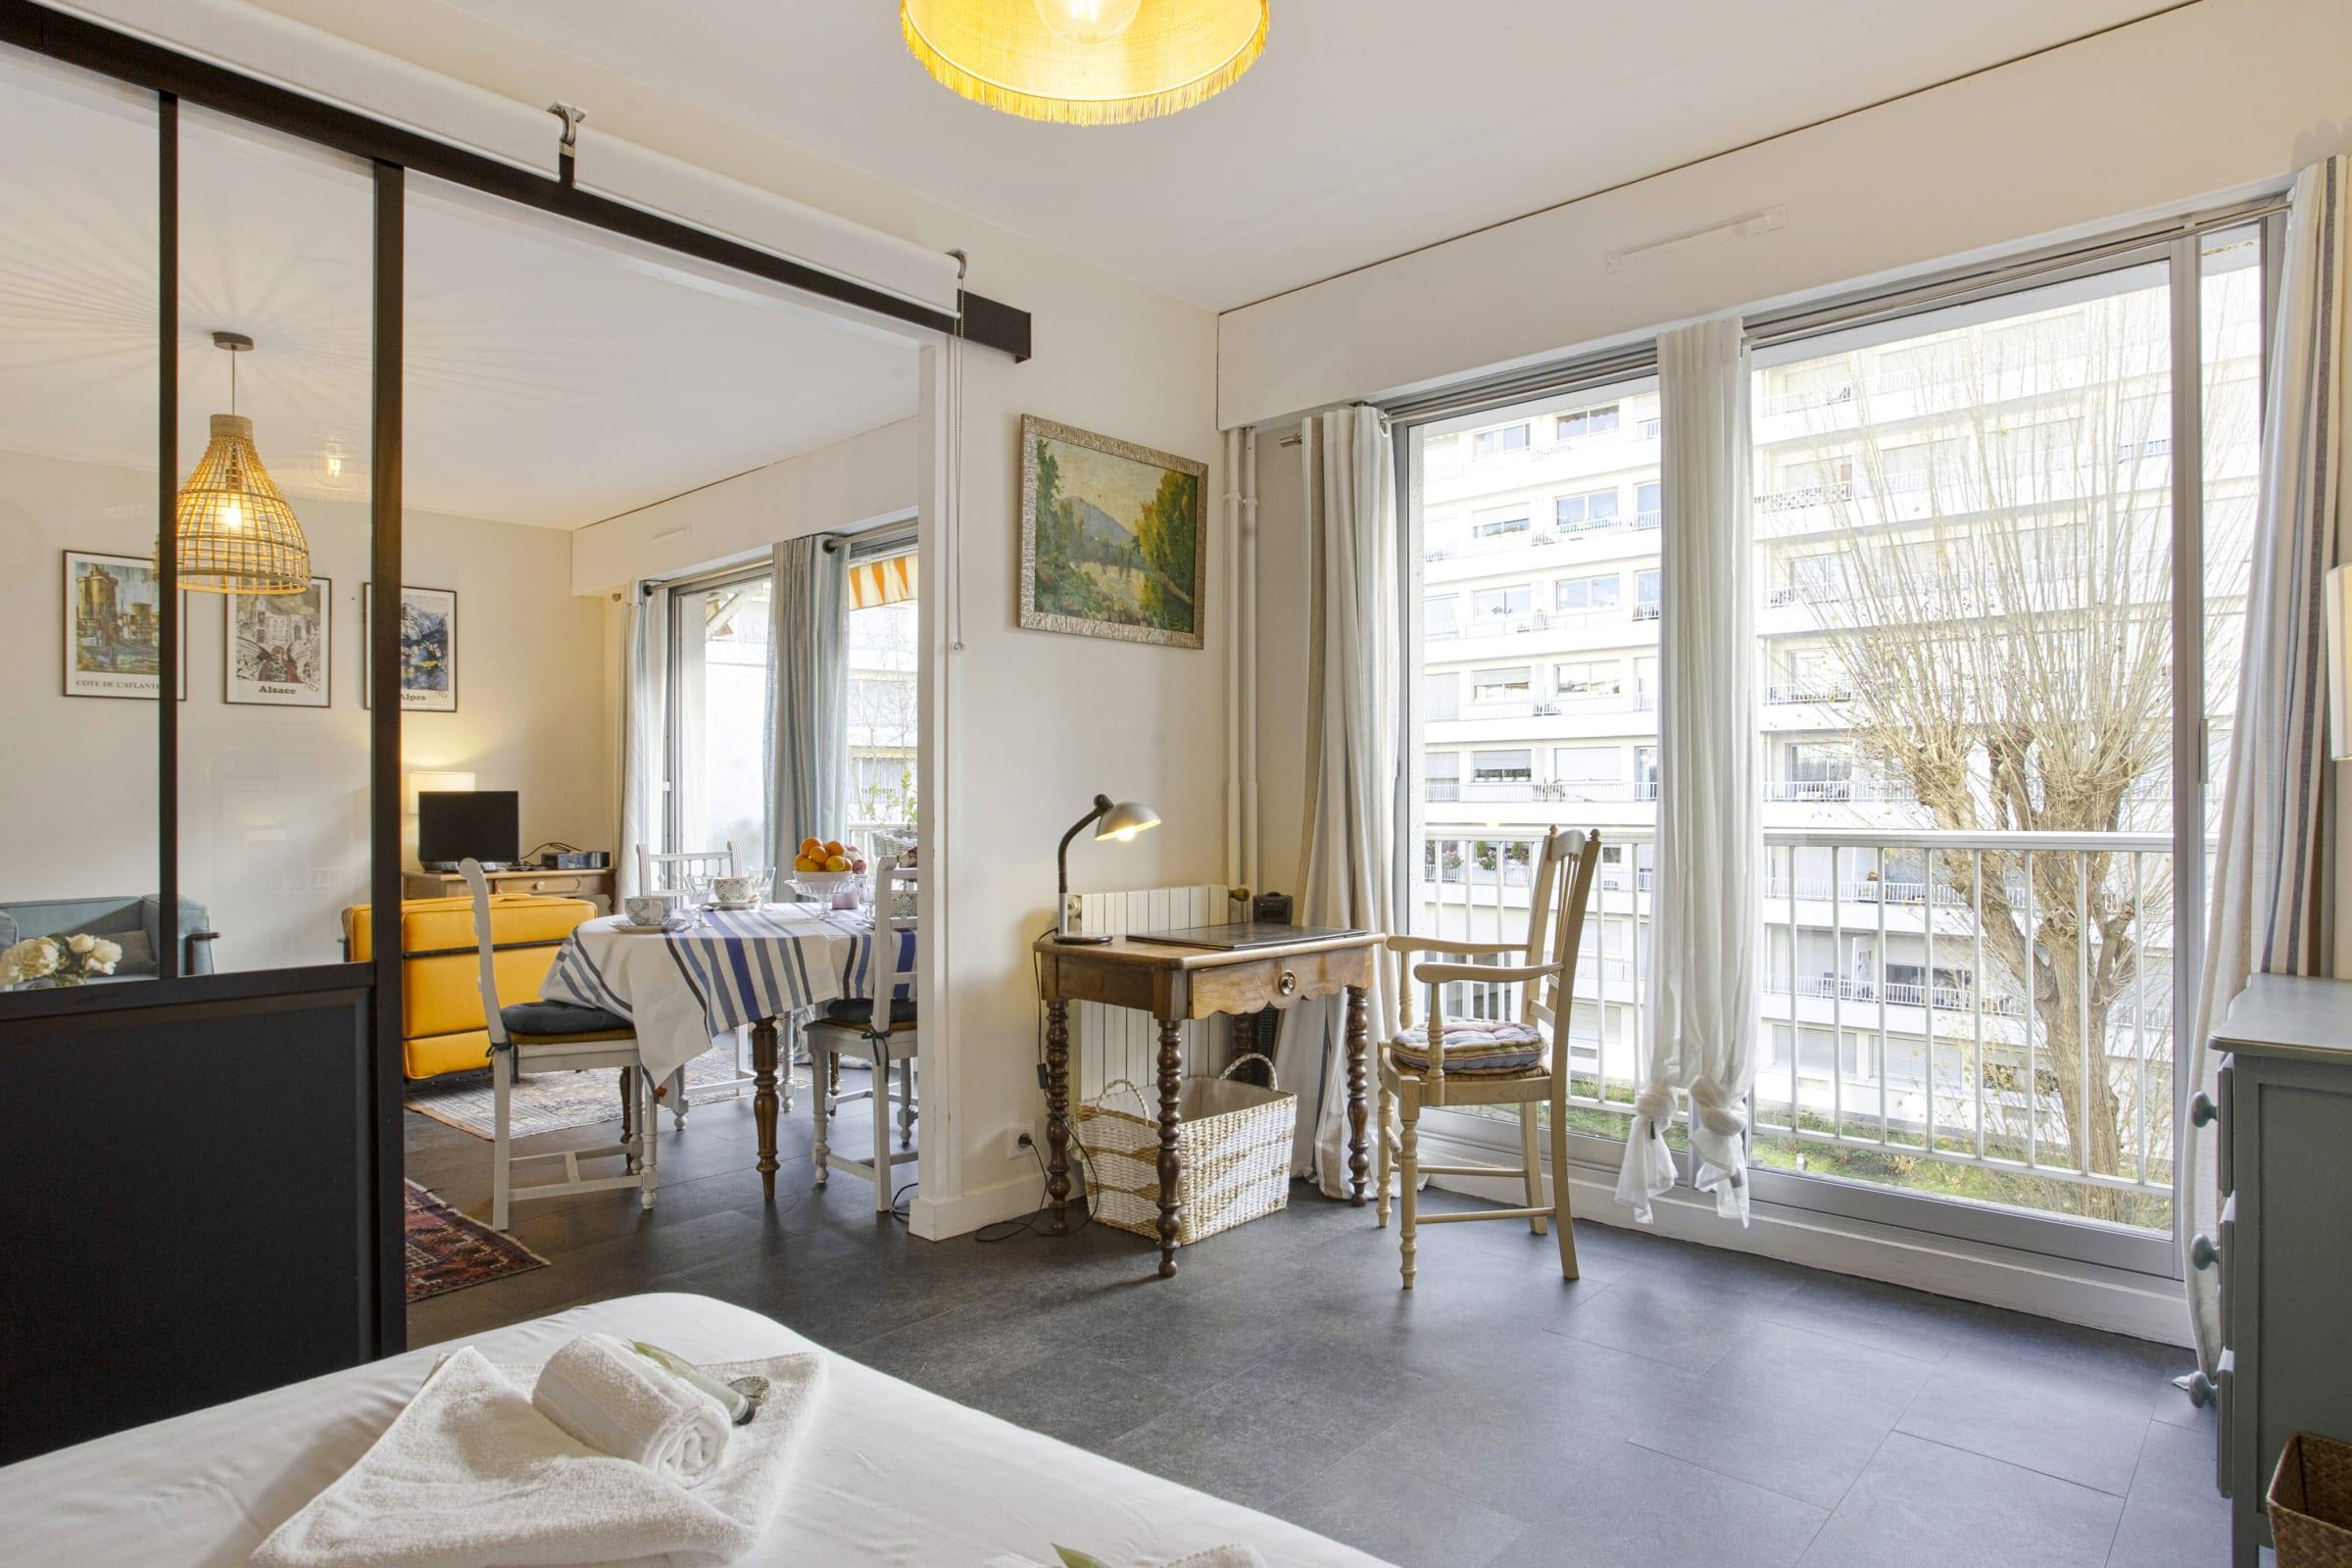 Nice and bright flat in the heart of Biarritz